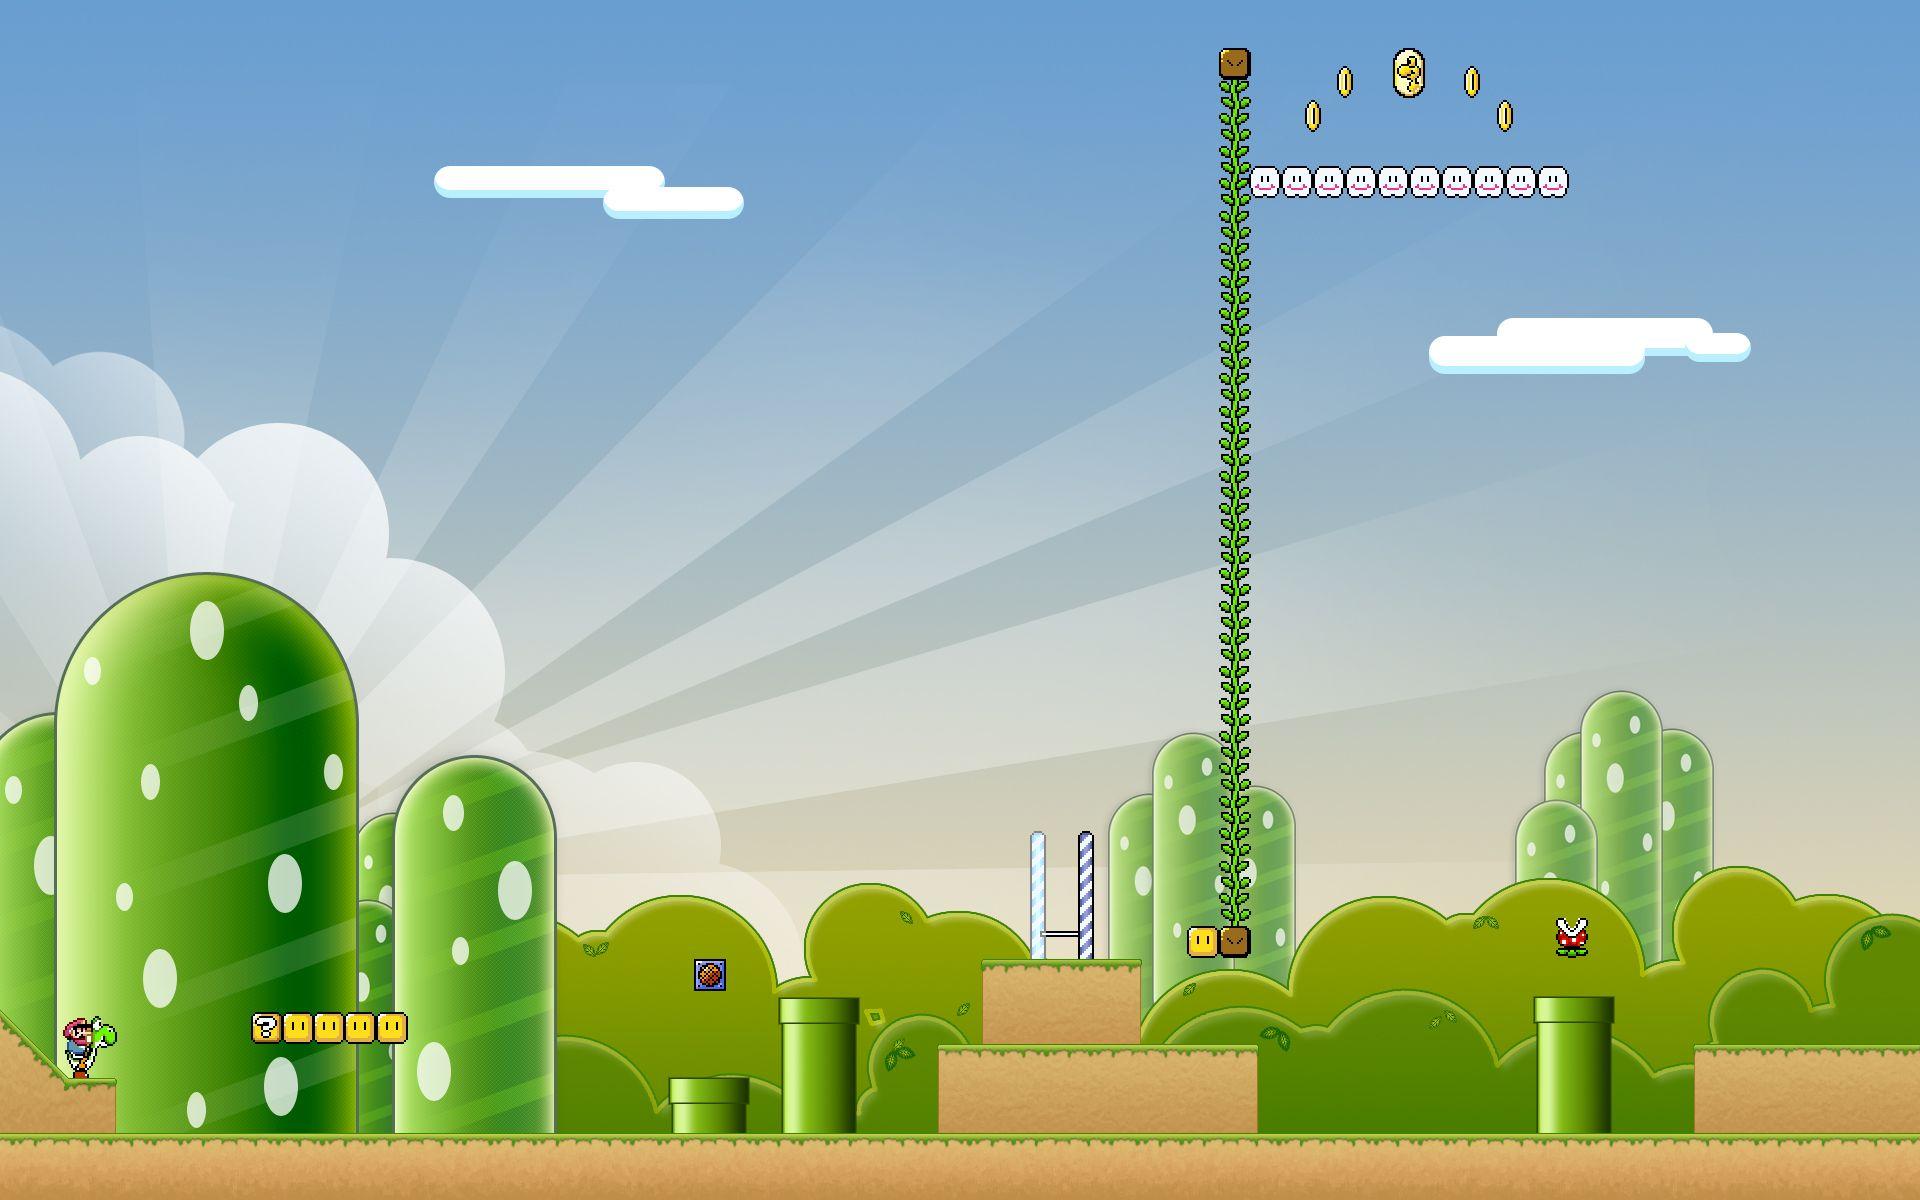 Awesome super mario inspired wallpaper and artwork Design